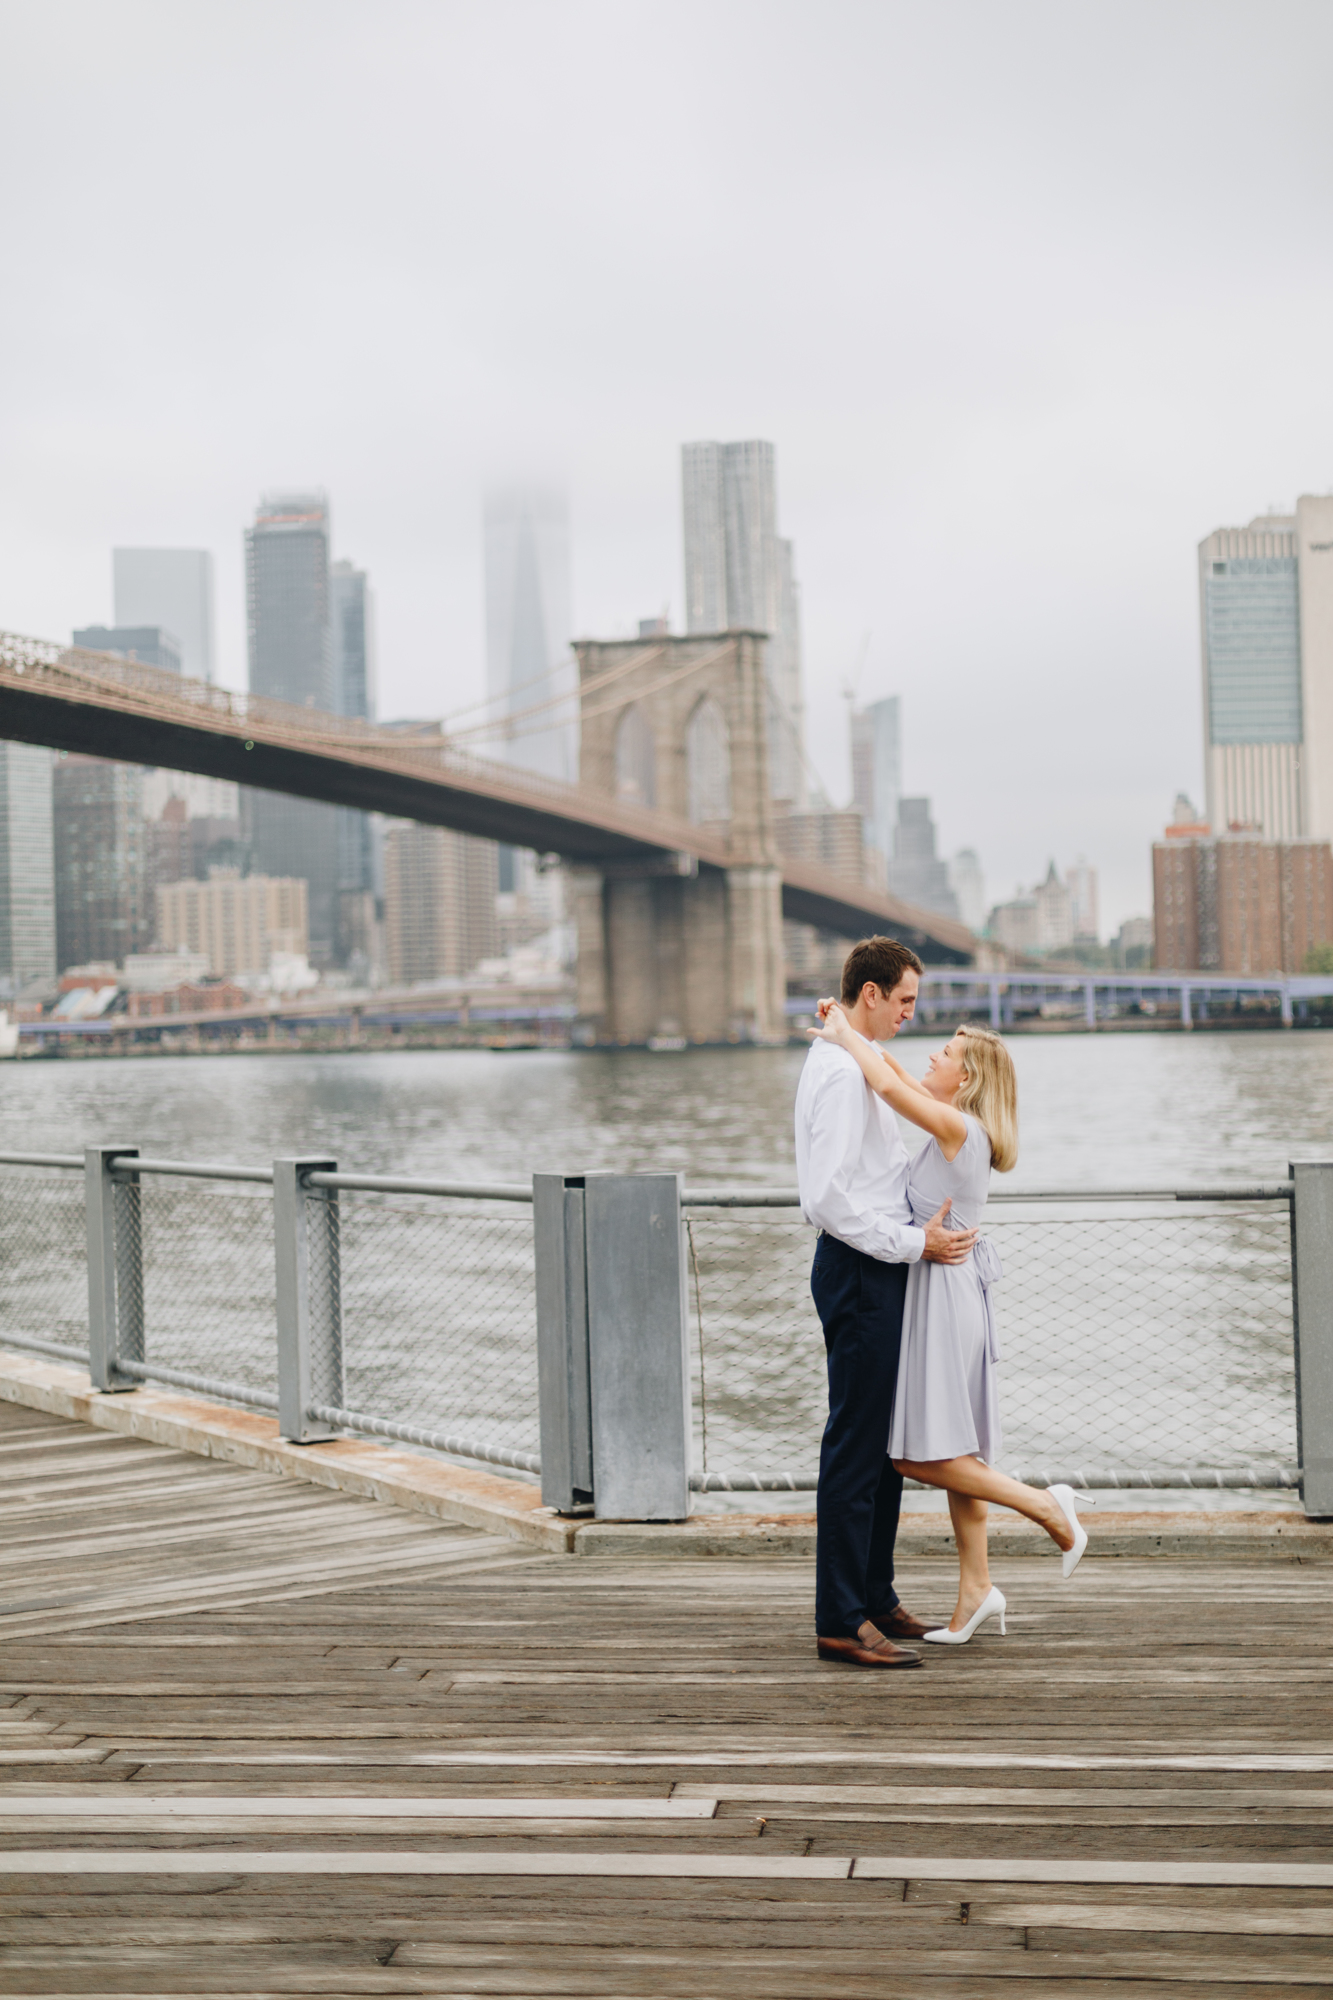 Picture-perfect Brooklyn Bridge Park Engagement Photos on a Cloudy Day in New York